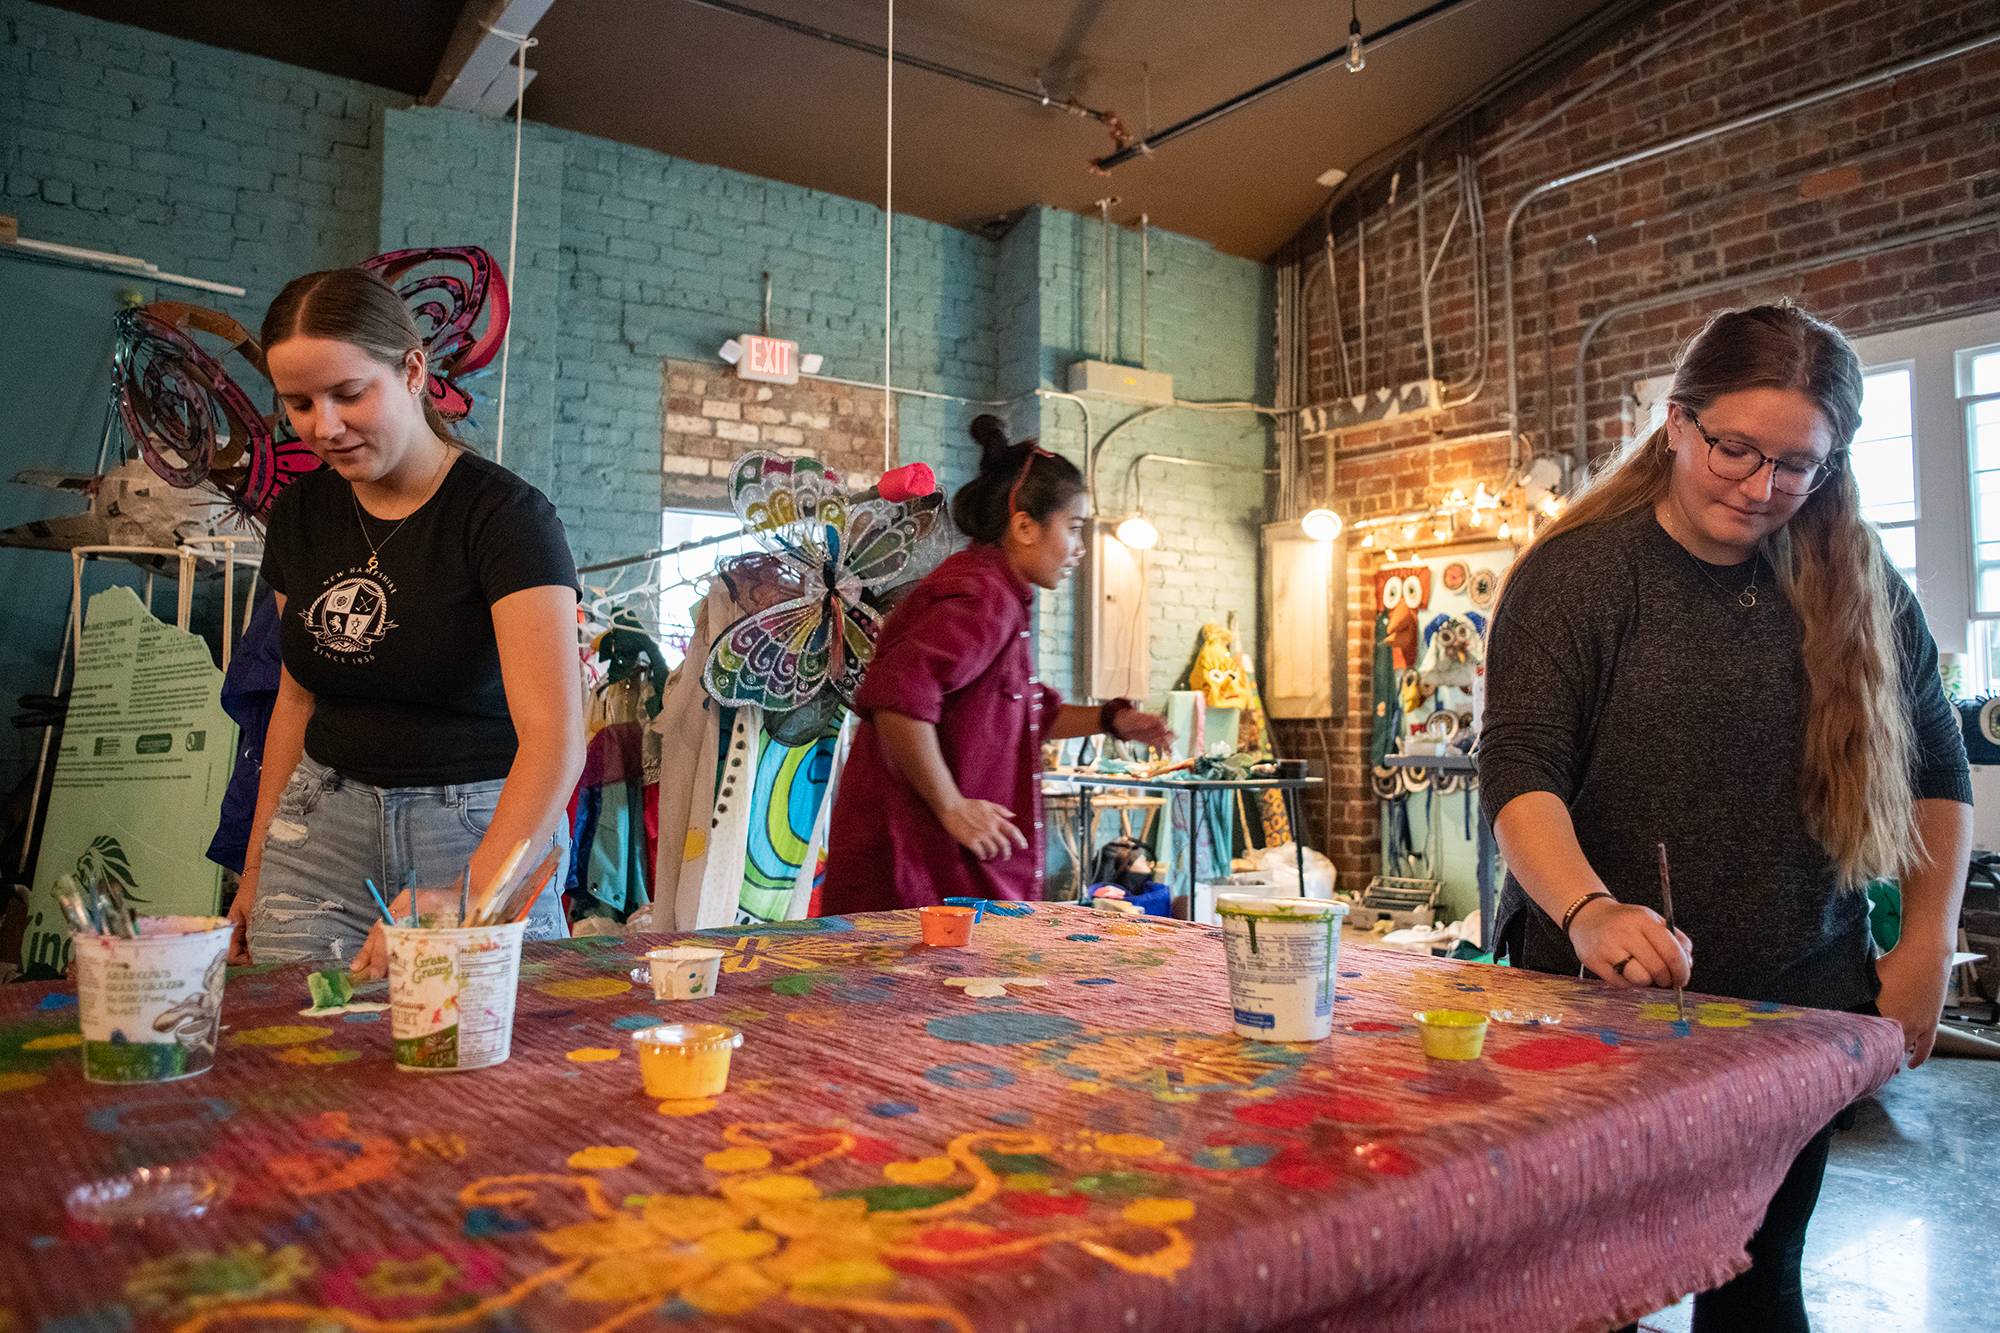 Members of an Ohio University learning community work together at the Central Venue to paint a banner to be used in the Passion Works Honey For The Heart Parade in Athens, Ohio.